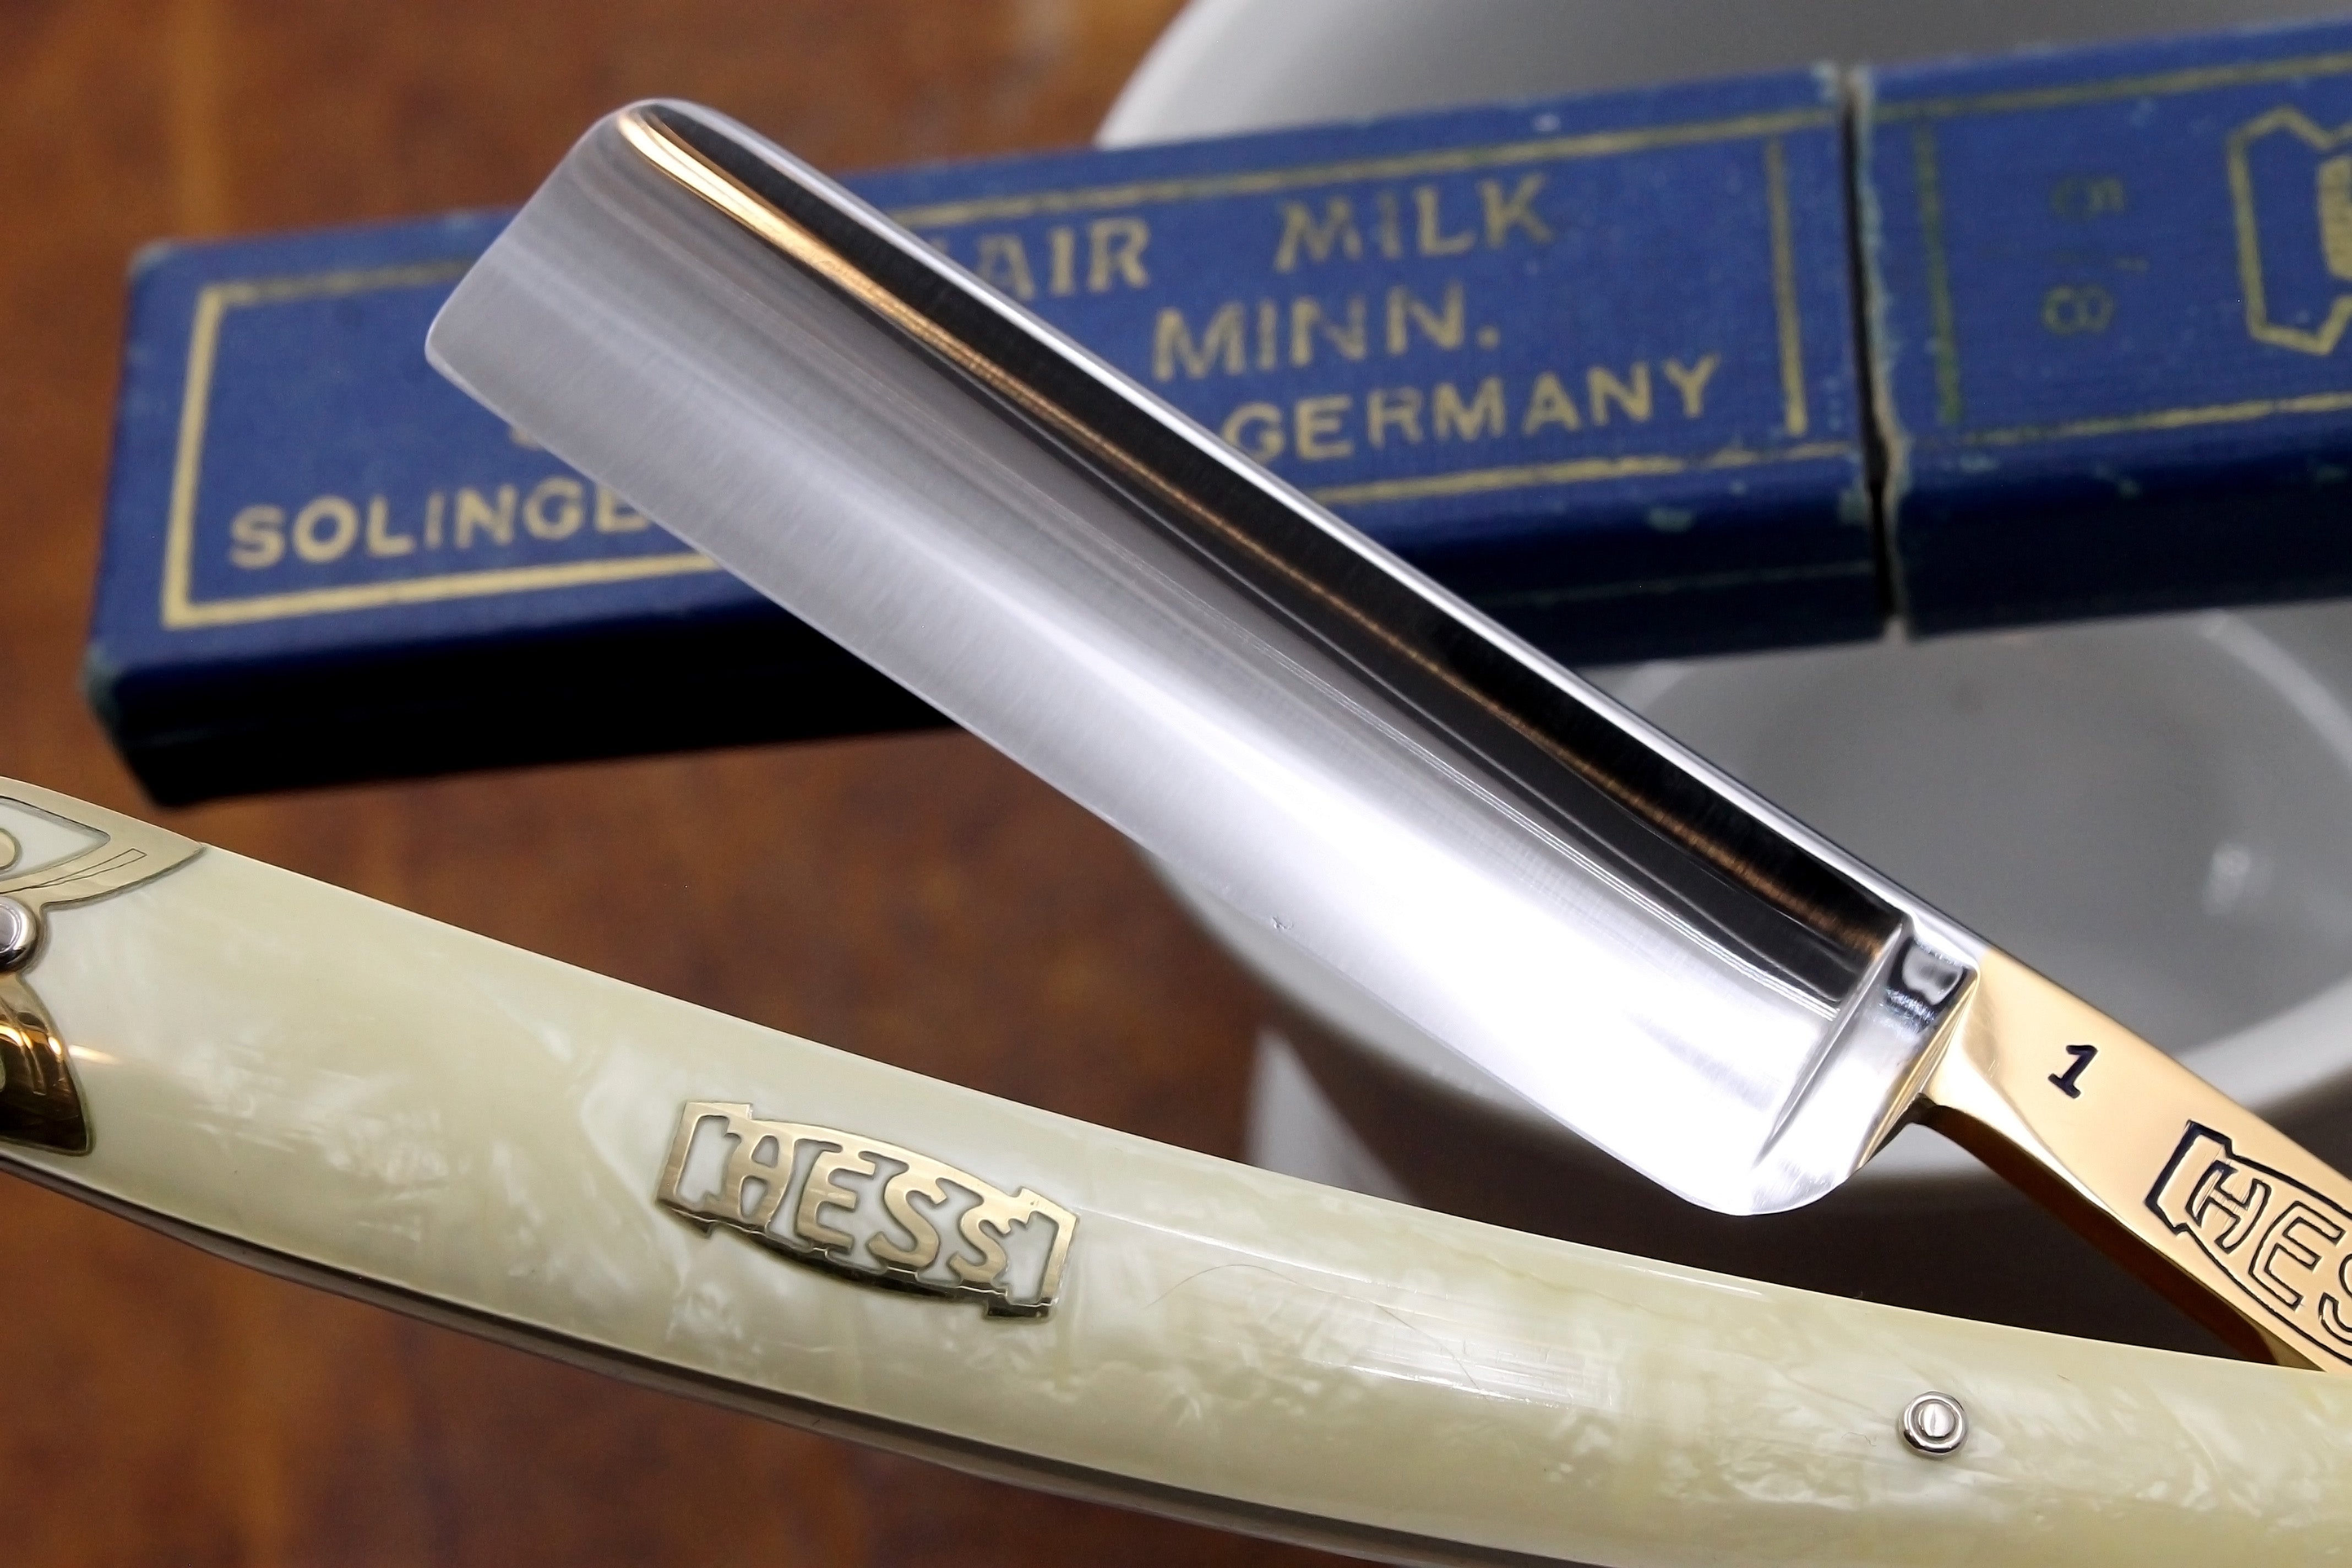 Hess Hair Milk Labs No.1 11/16 Blade Cracked Ice Scales - Fully Restored Vintage Solingen Straight Razor - Shave Ready